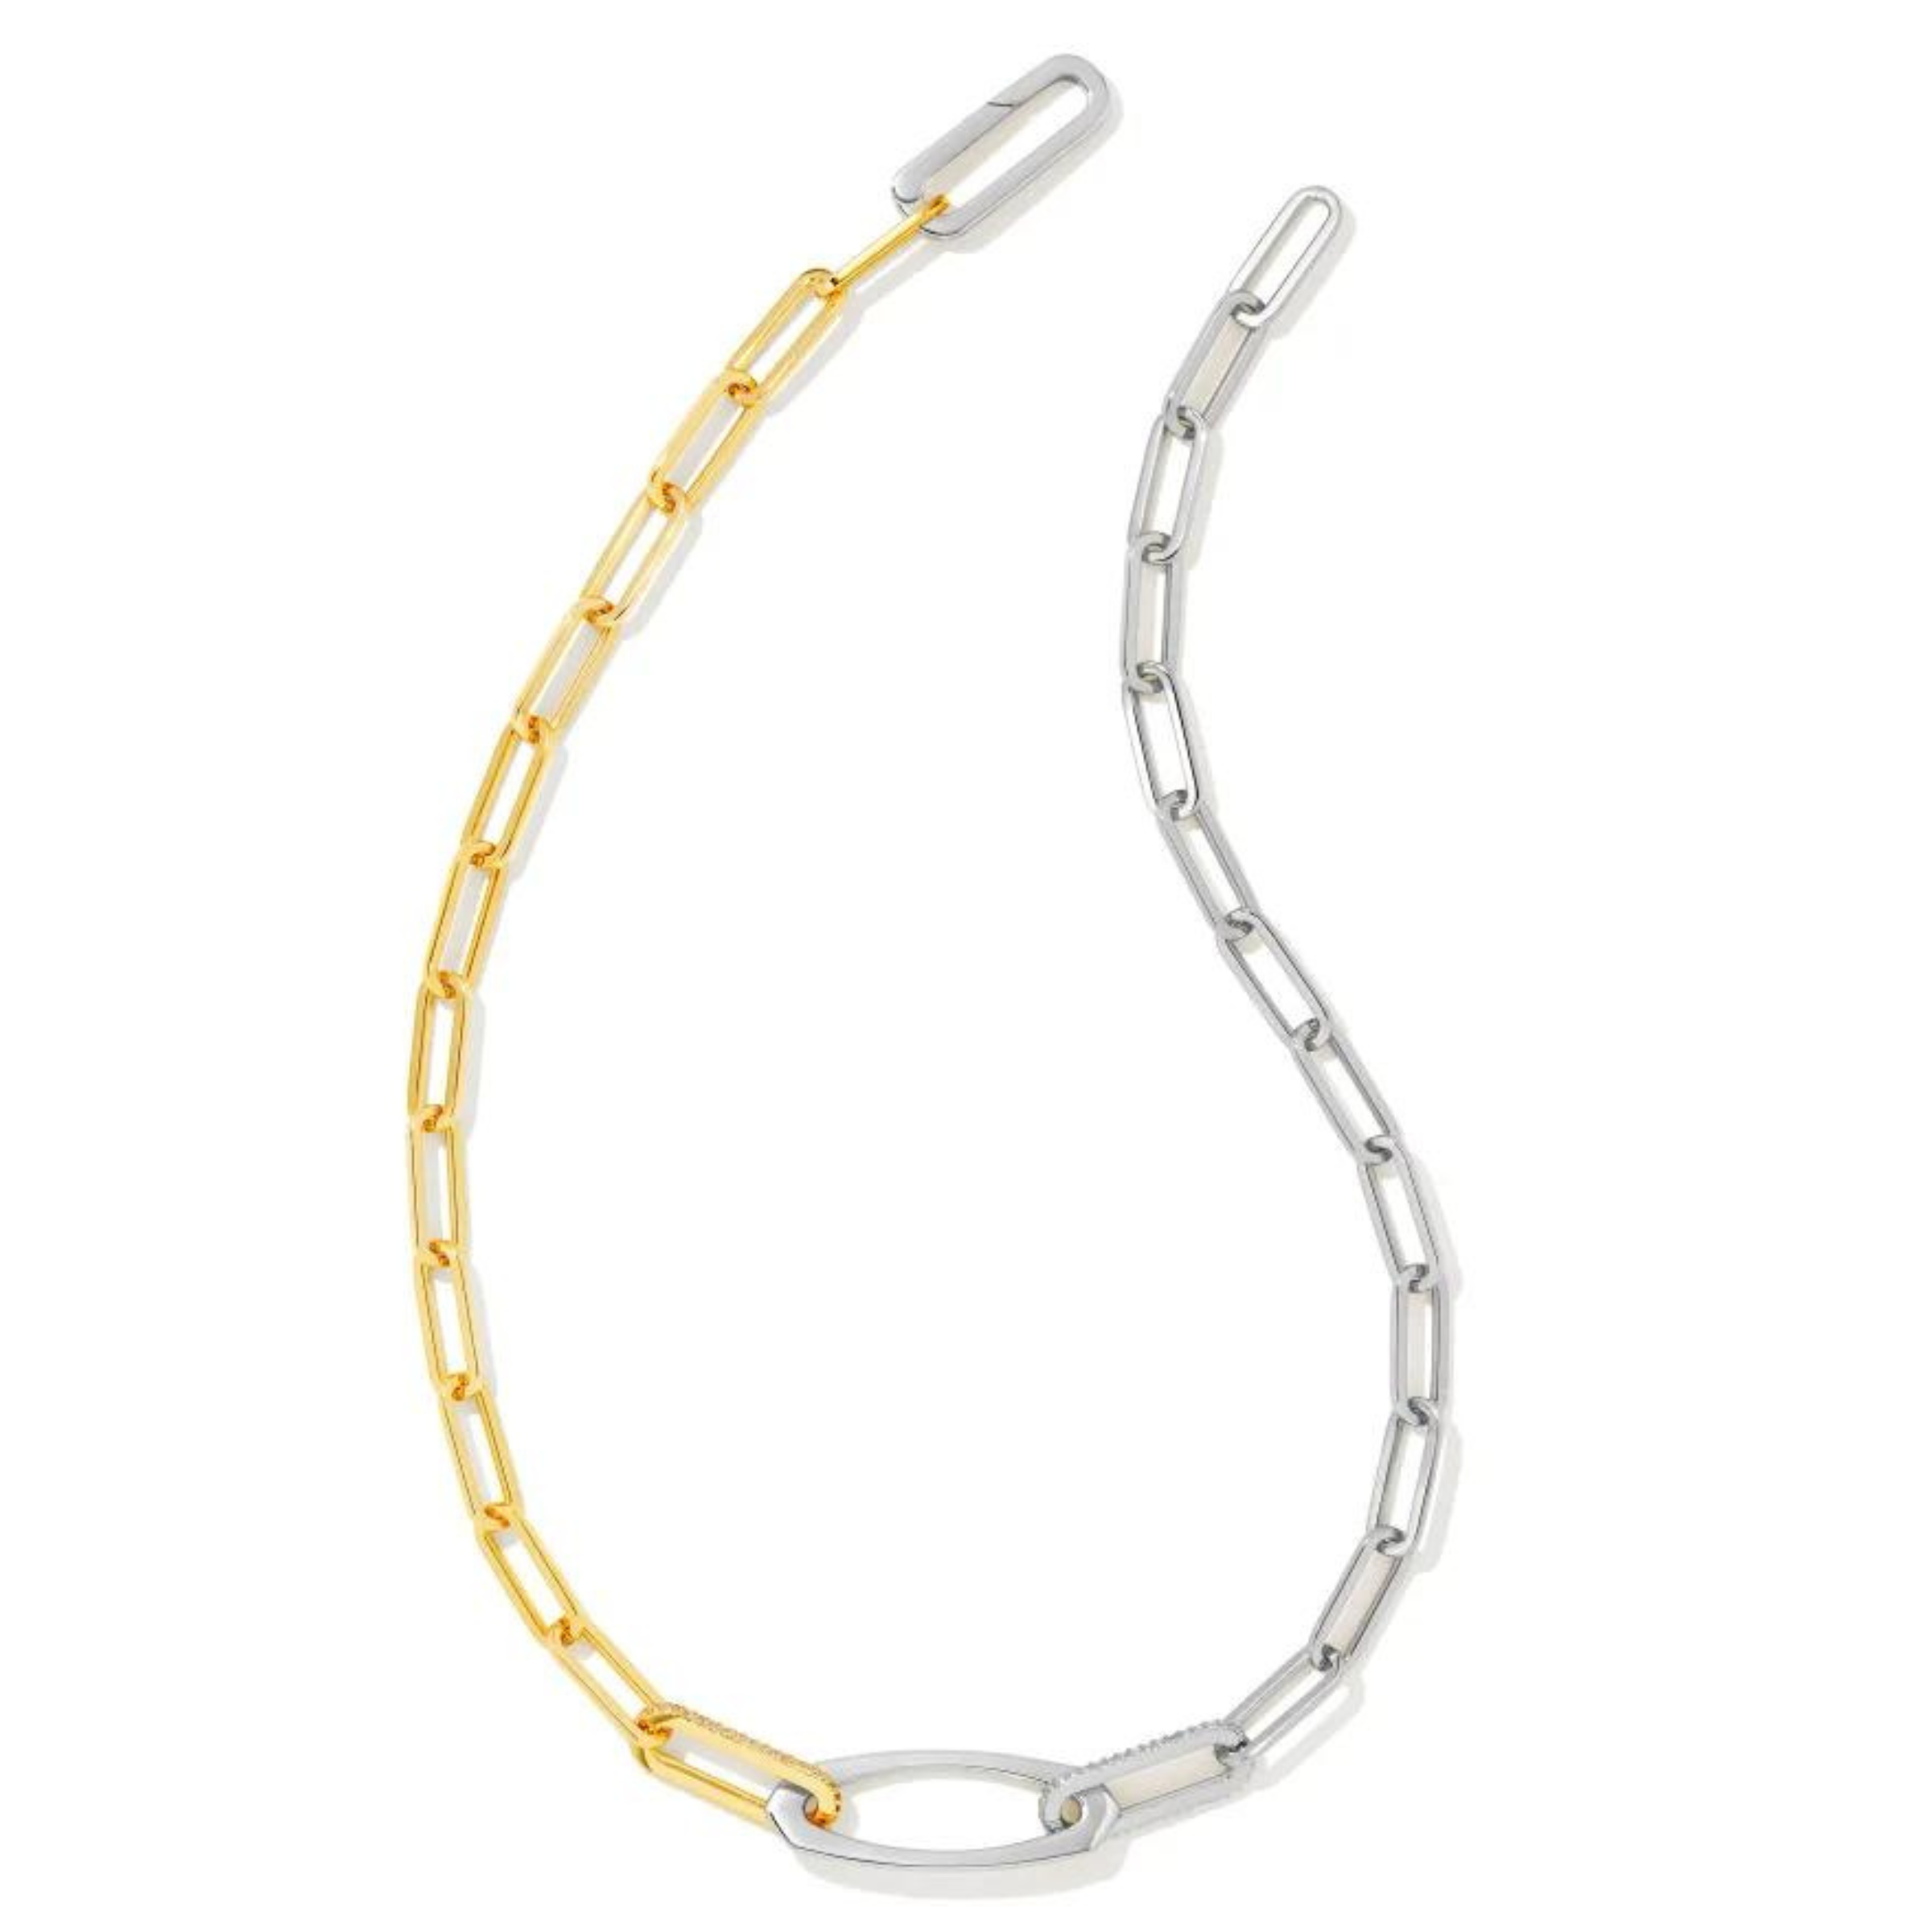 Half silver and half gold paperclip chain necklace pictured on a white background. 